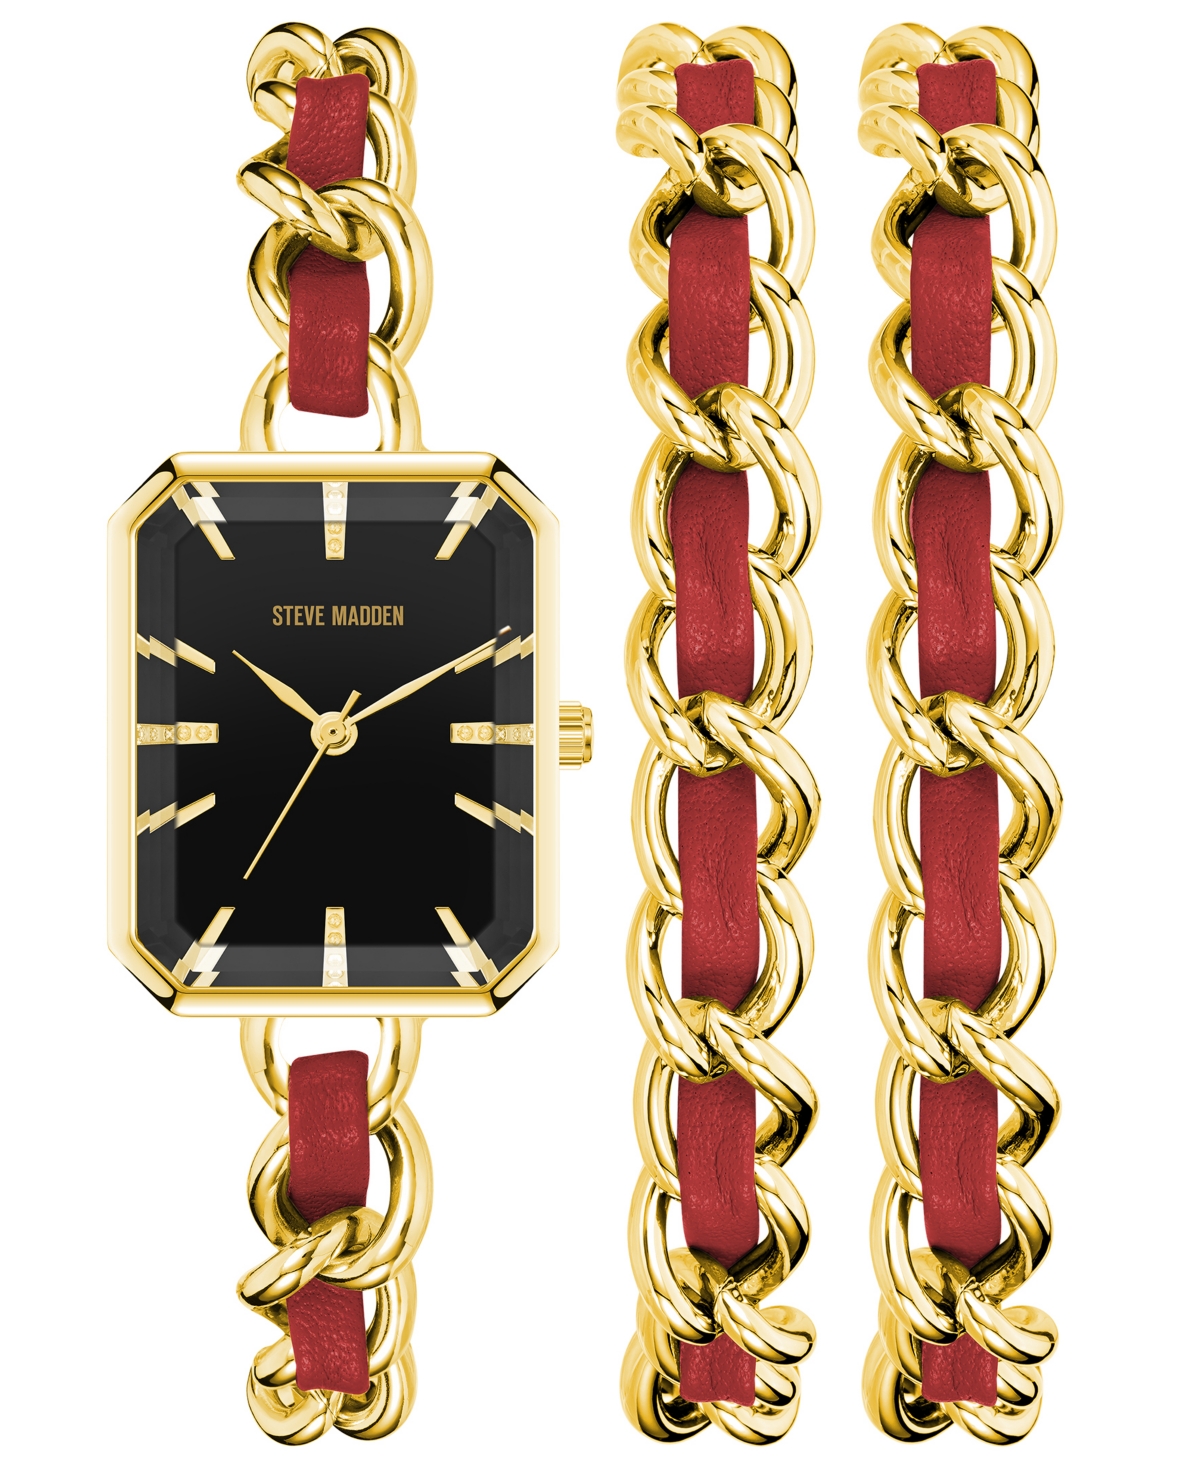 Women's Gold-Tone Alloy Chain with Red Insert Bracelet Watch Set, 22mm - Gold-Tone, Red